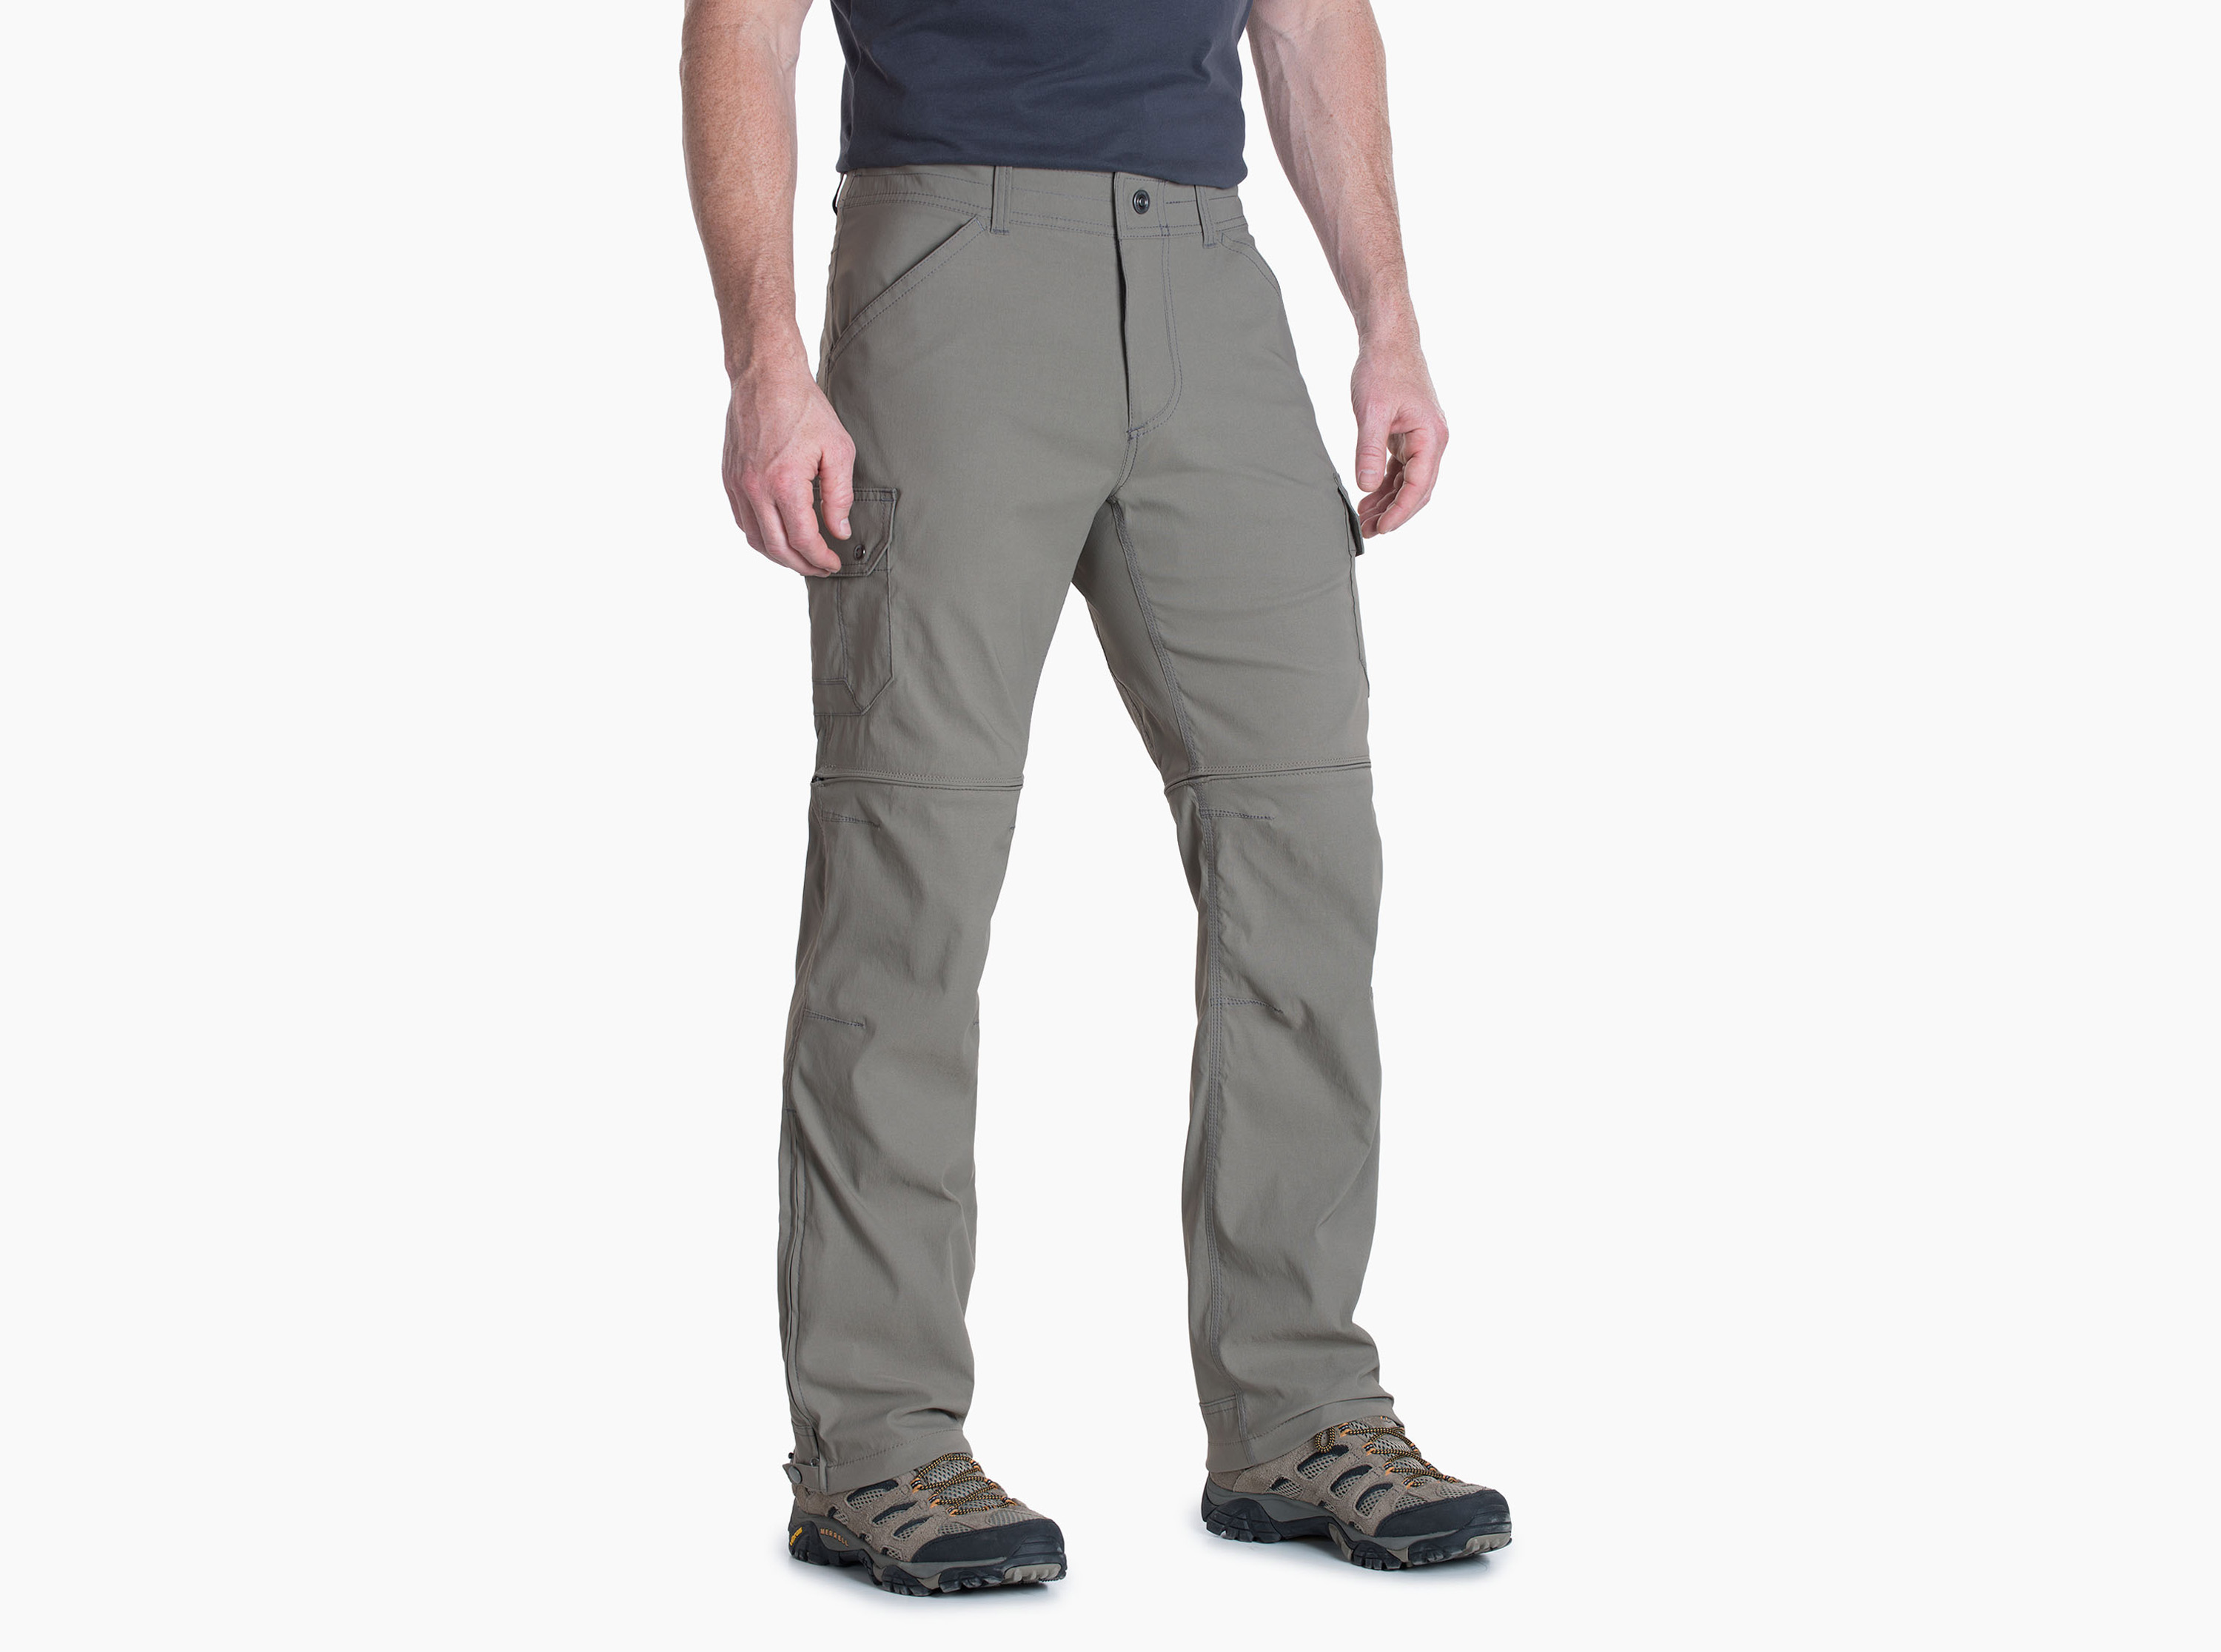 Kuhl Men's Nylon Stretch Hiking Outdoor Cargo Convertible Pants Brown •  36x30